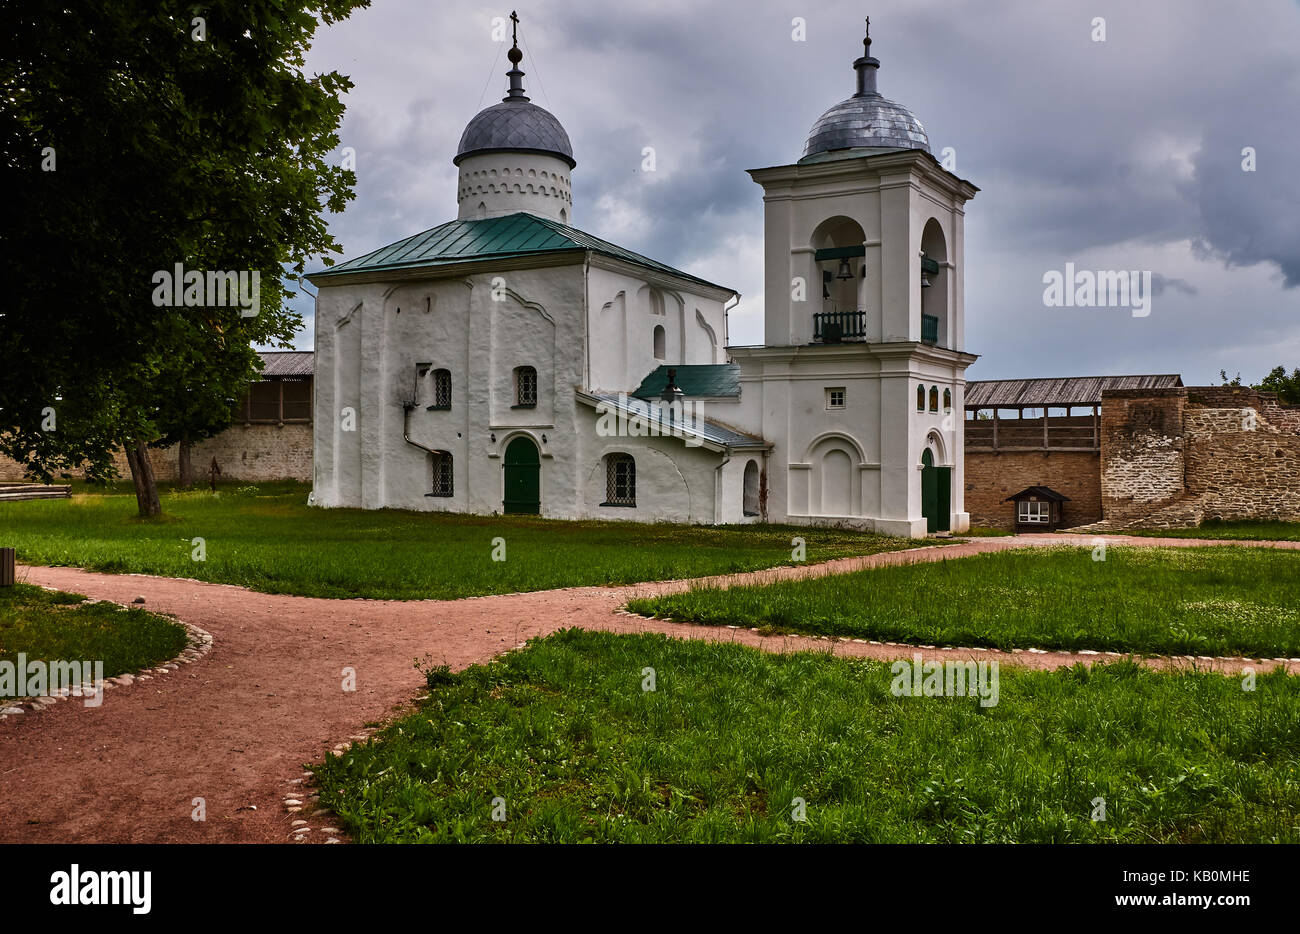 The Orthodox temple is located inside the ancient fortress. Near the church there is a white one-tiered bell tower. Russia, Pskov region, landscape Stock Photo